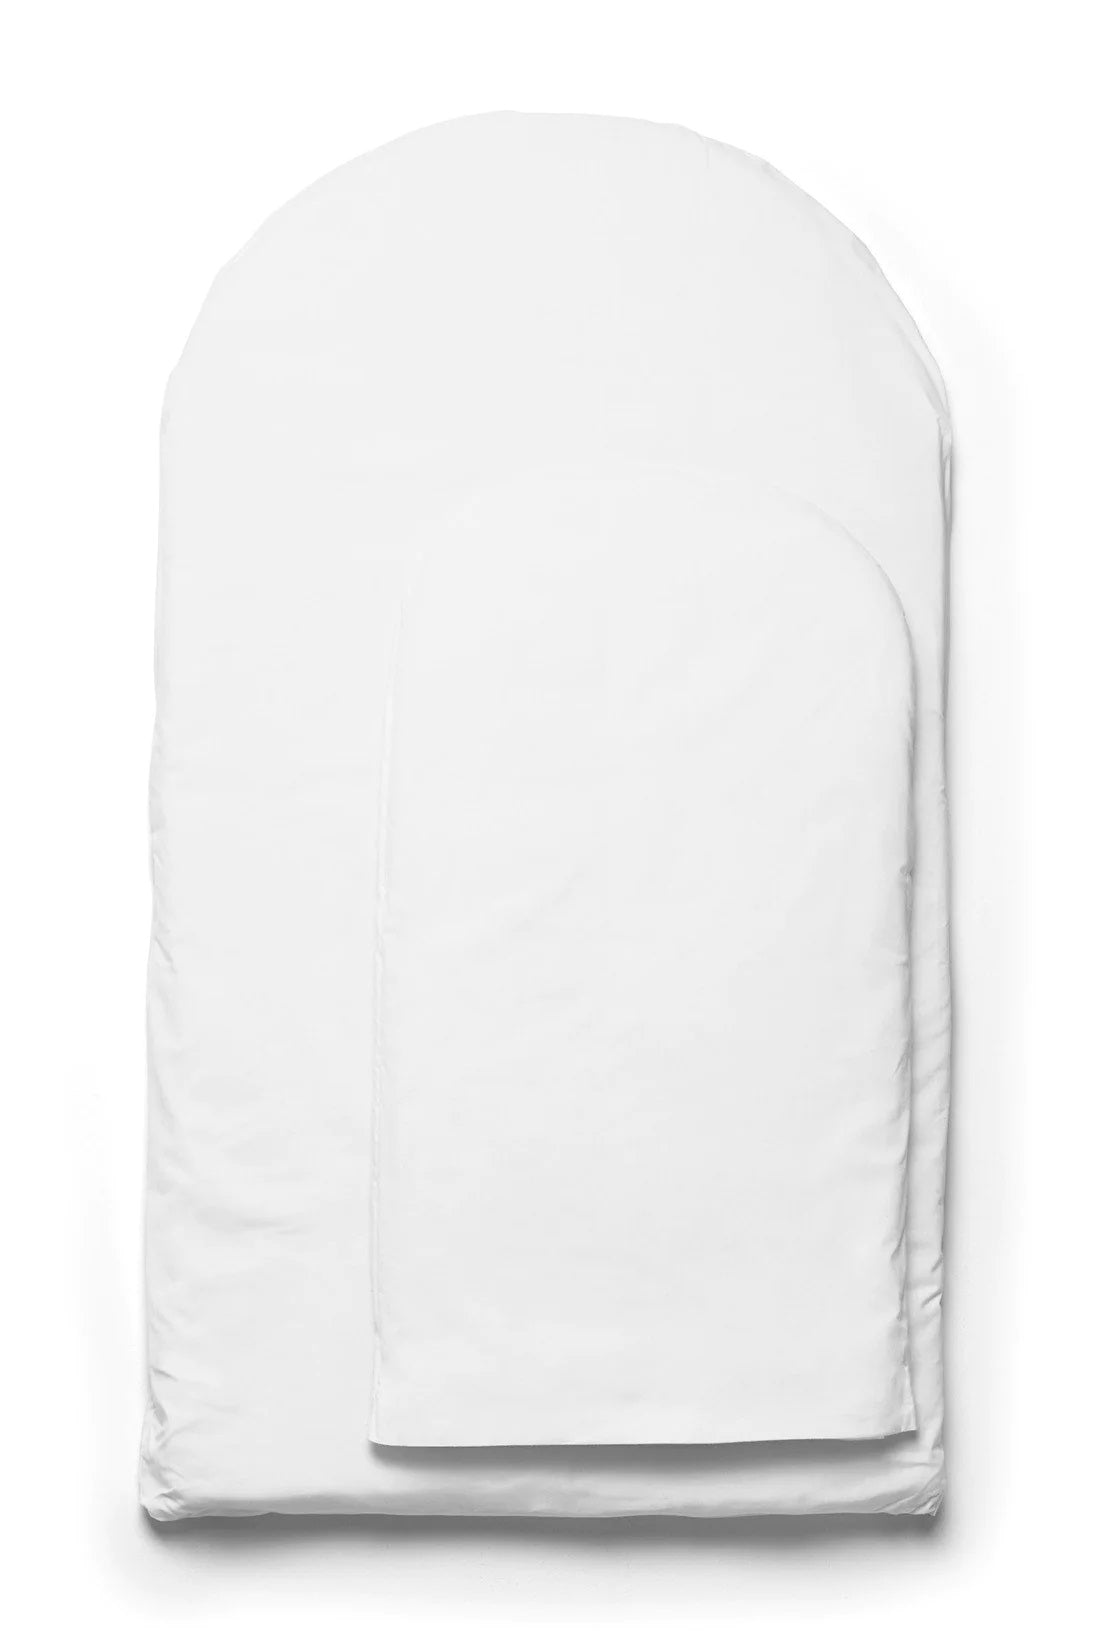 Dock A Tot replacement pad deluxe+ grand, white color, top view